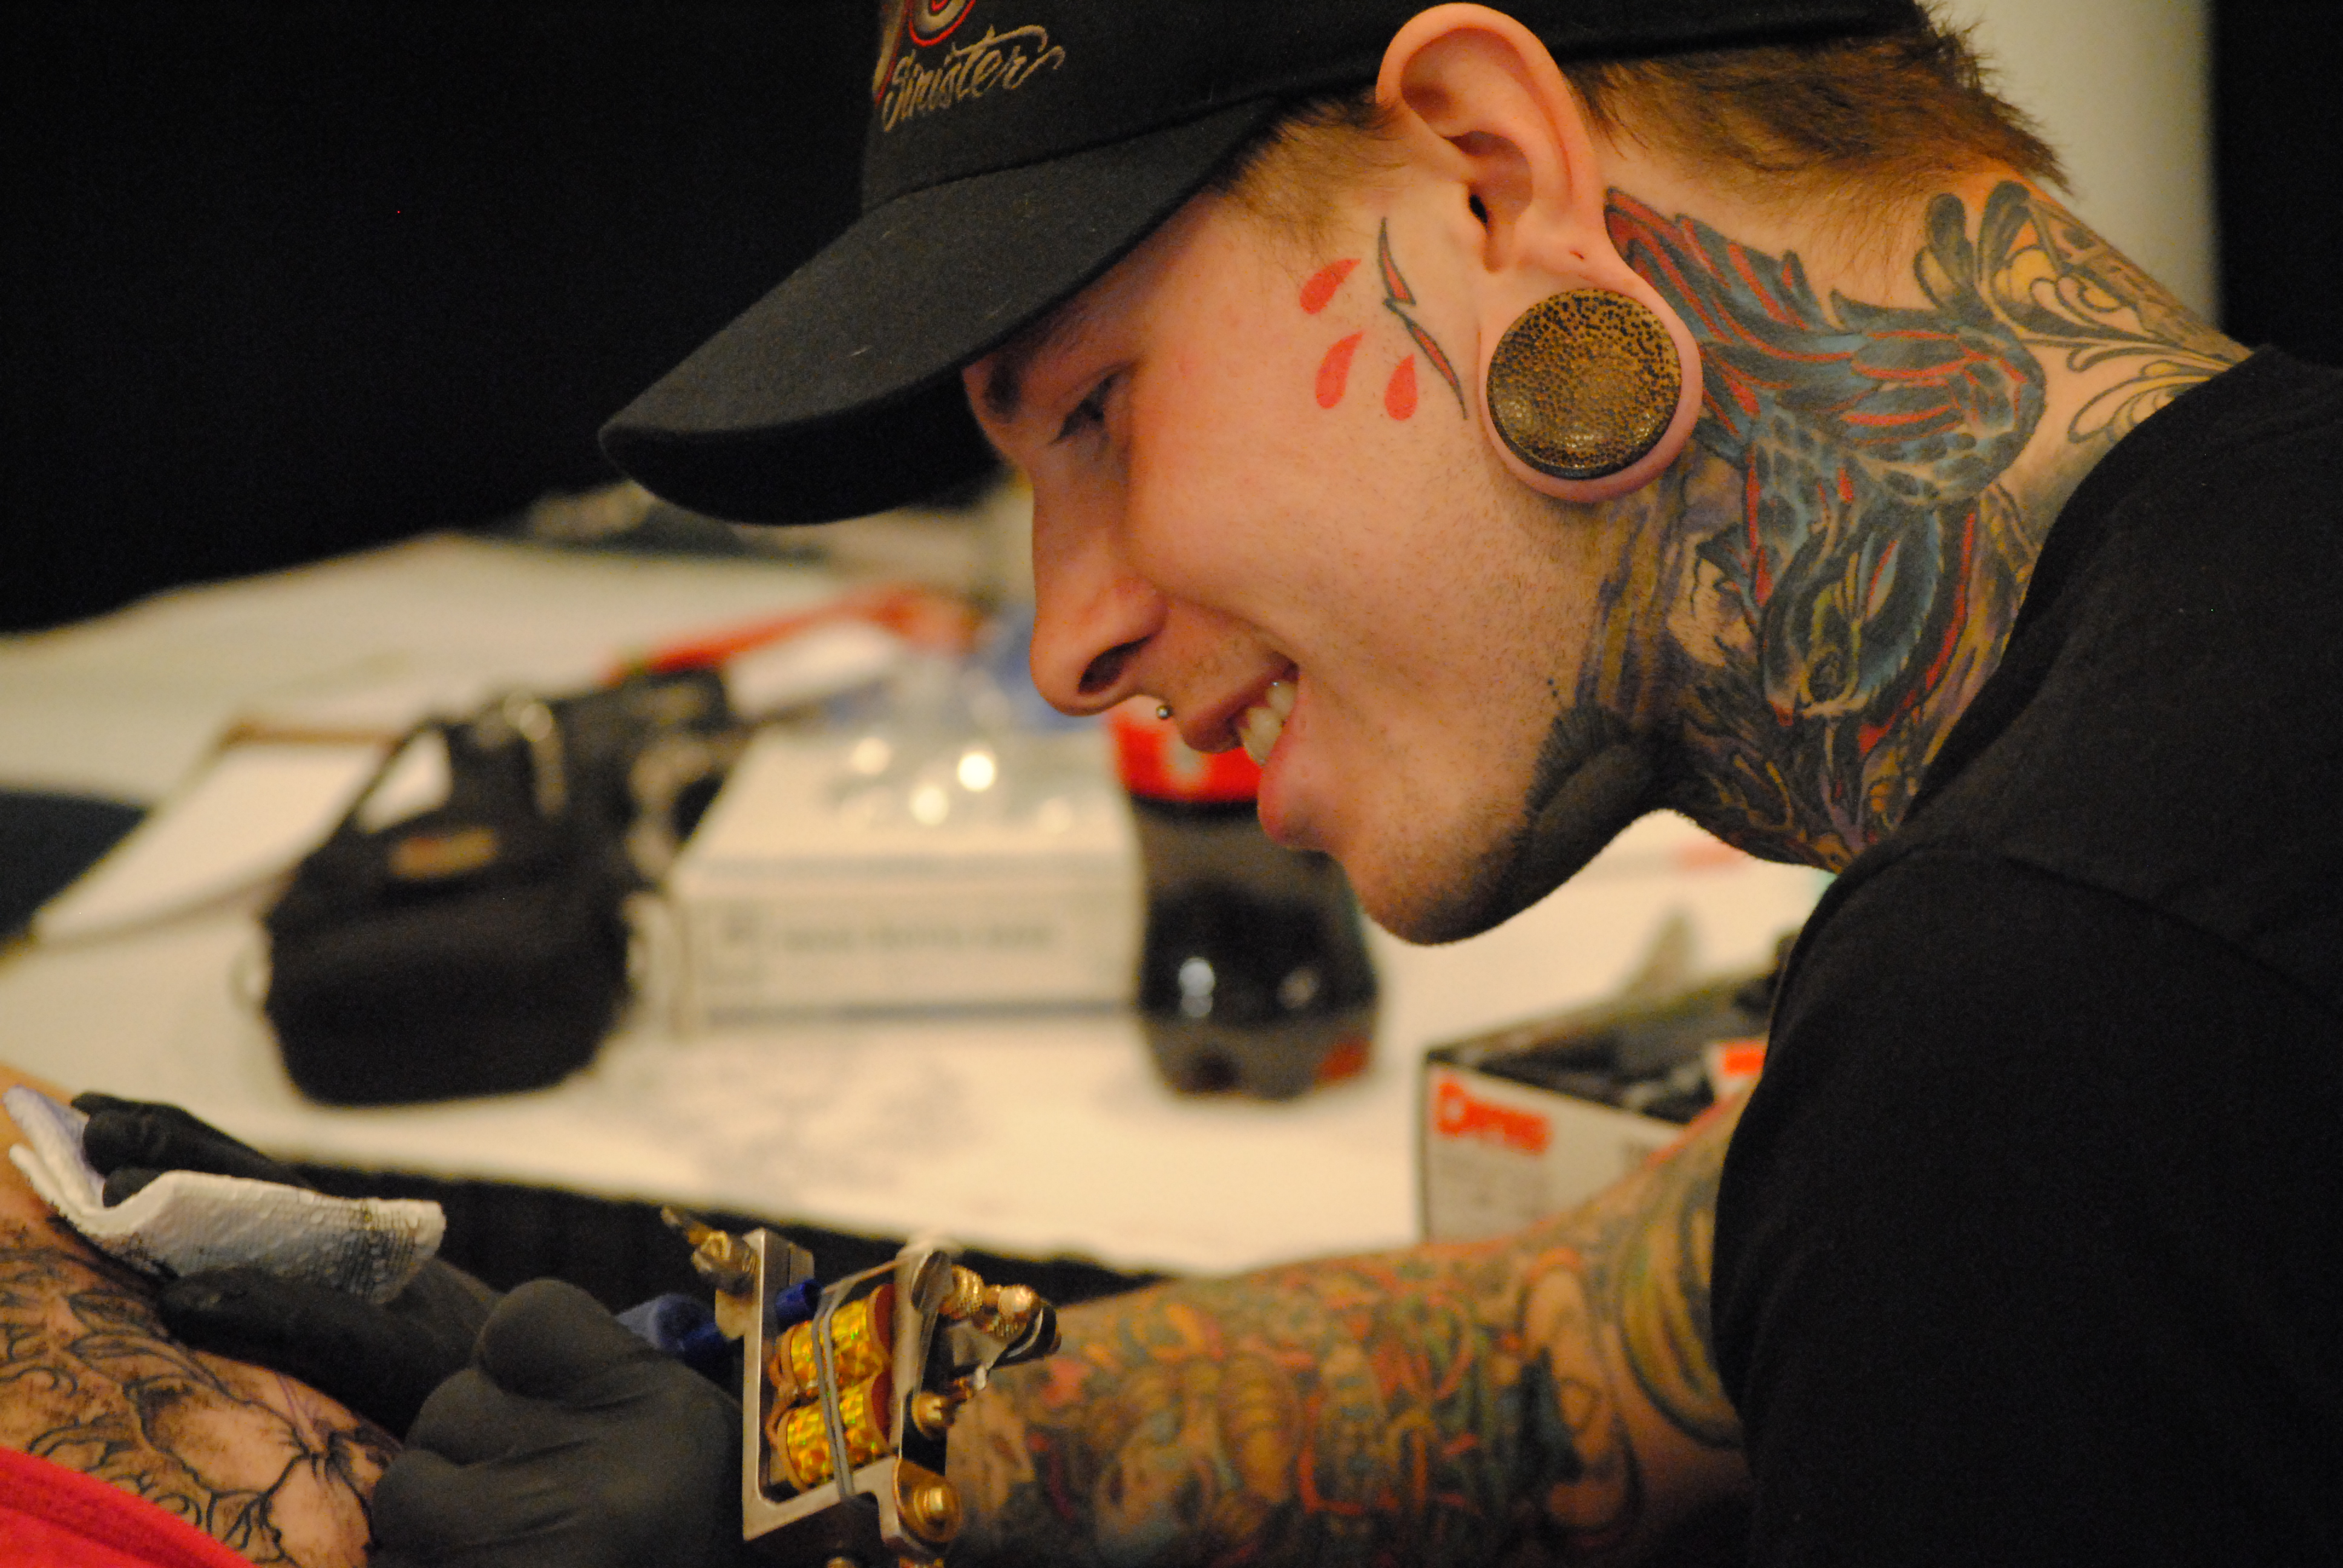 The Top 6 reasons to attend the 6th annual Electric City Tattoo Convention   NEPA Scene